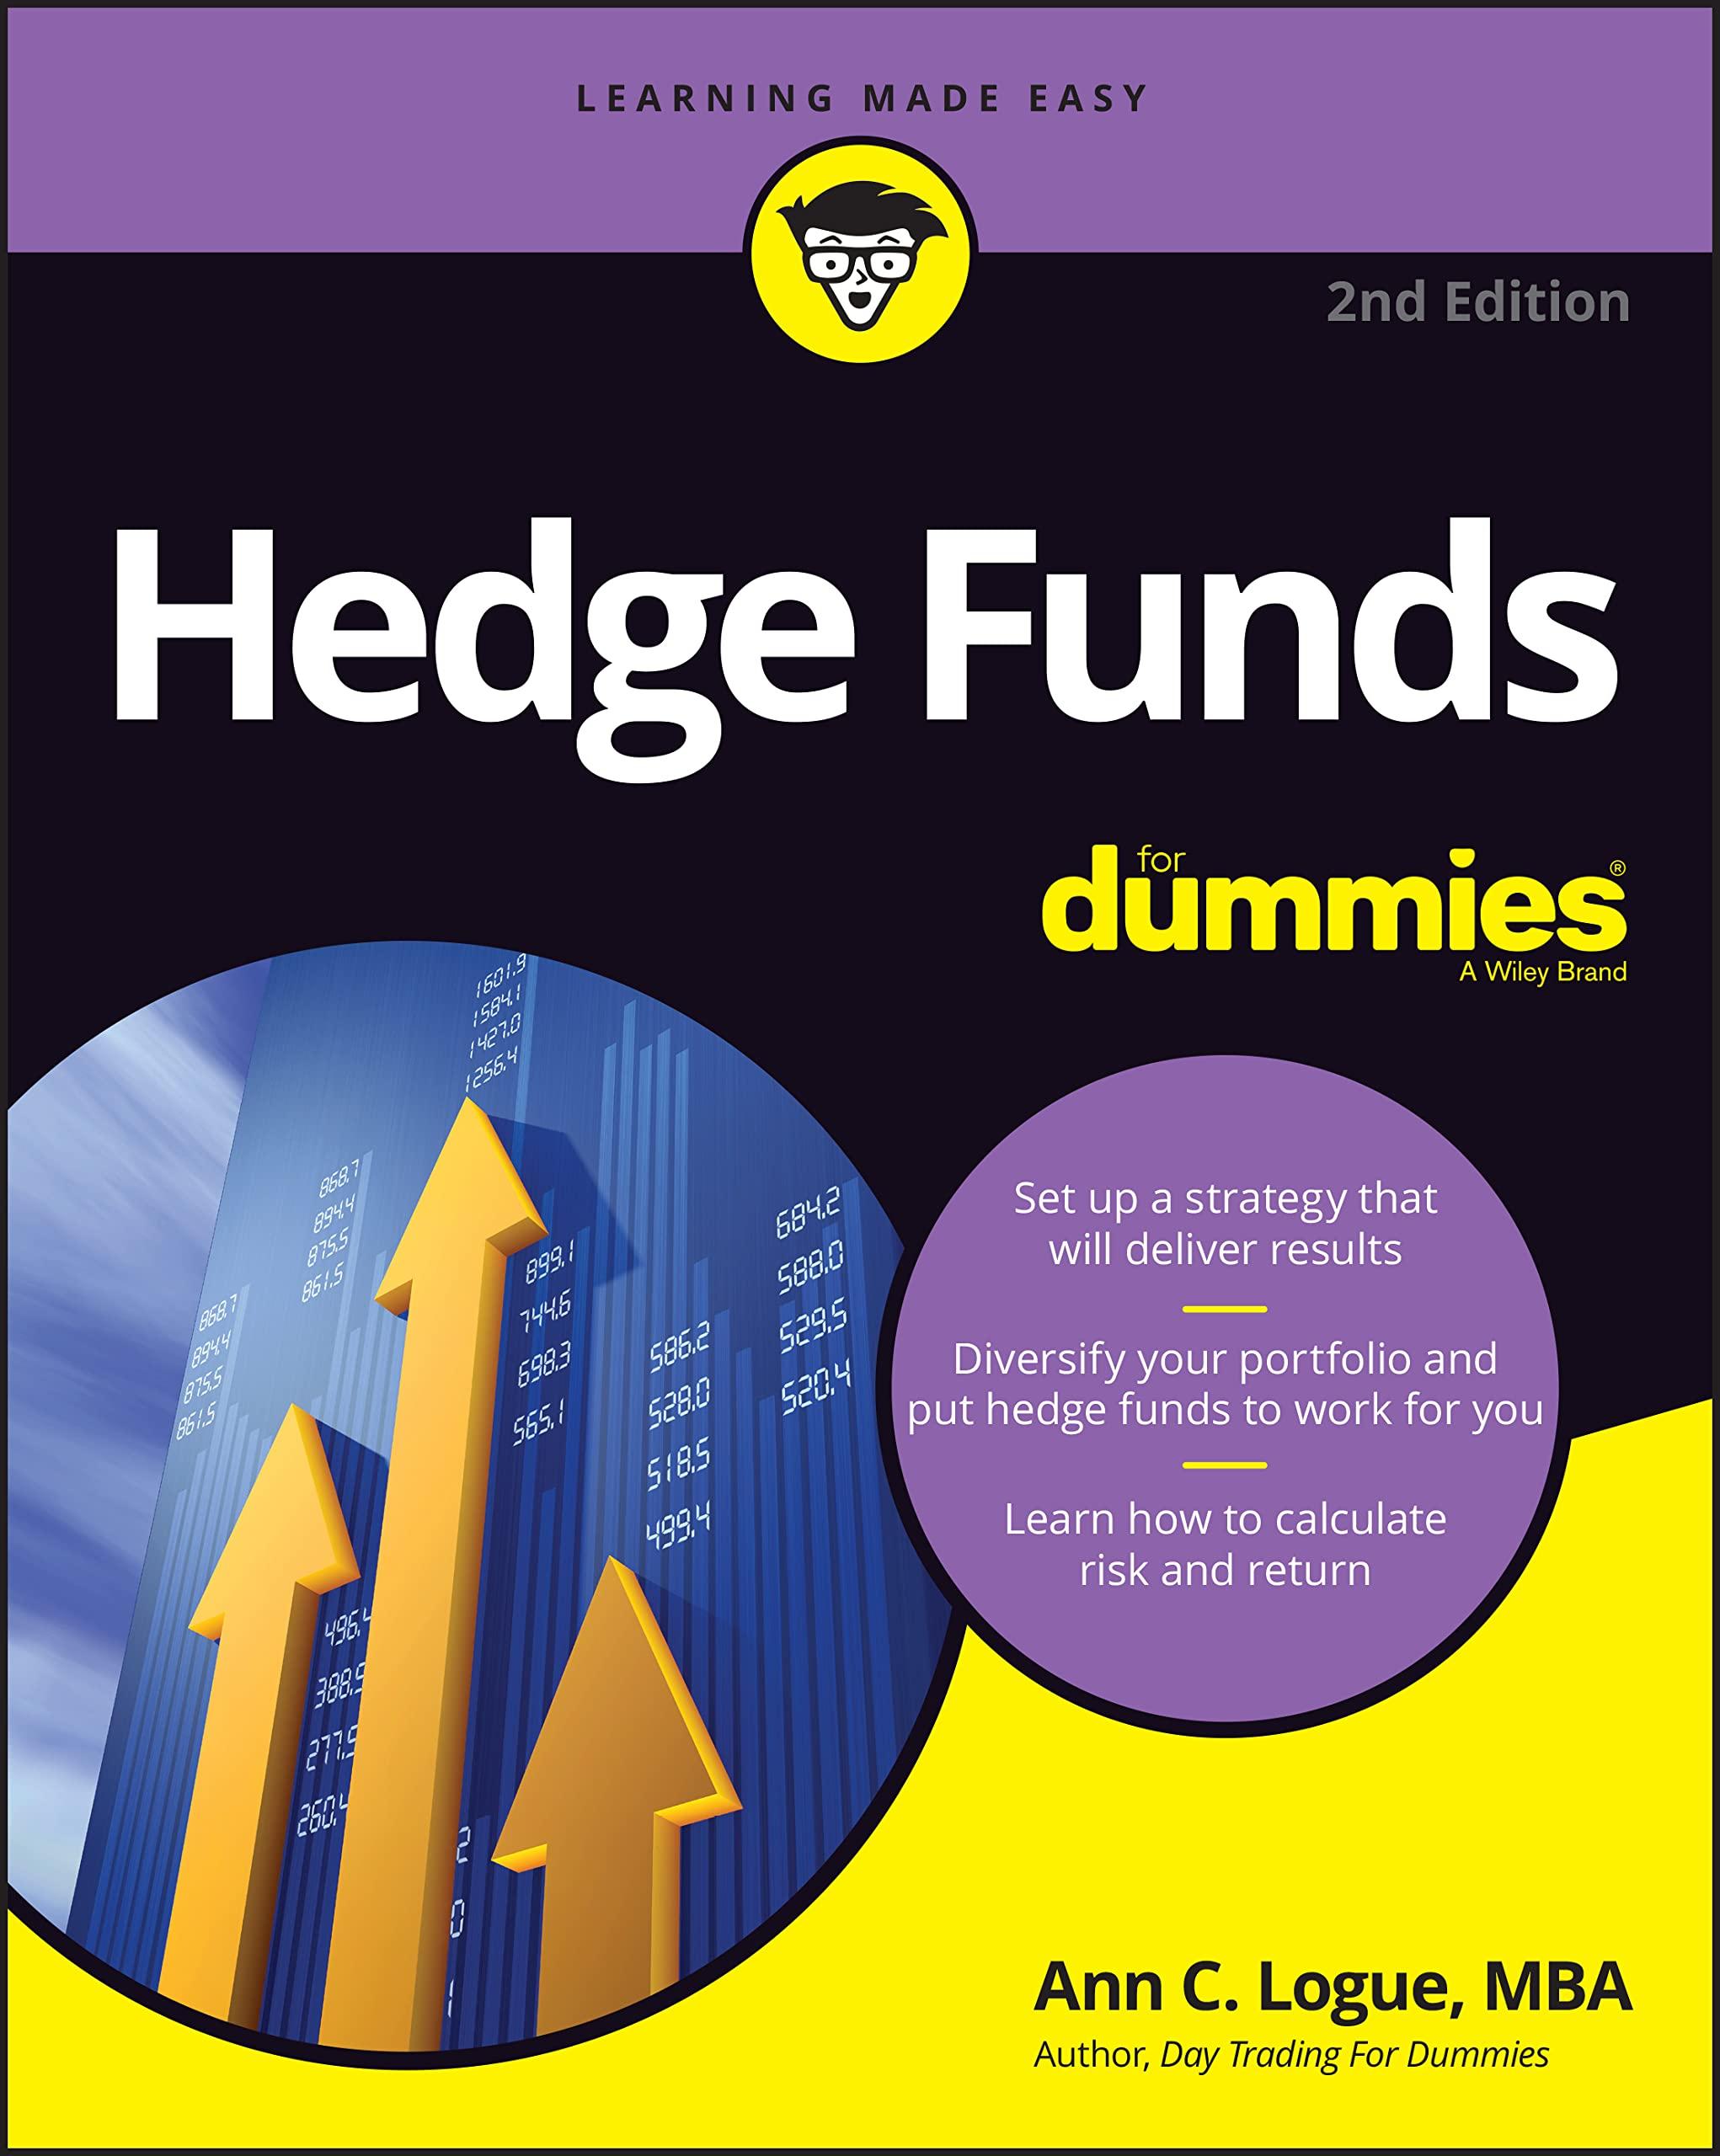 hedge funds for dummies a wiley brand 2nd edition ann c. logue 1119907551, 978-1119907558